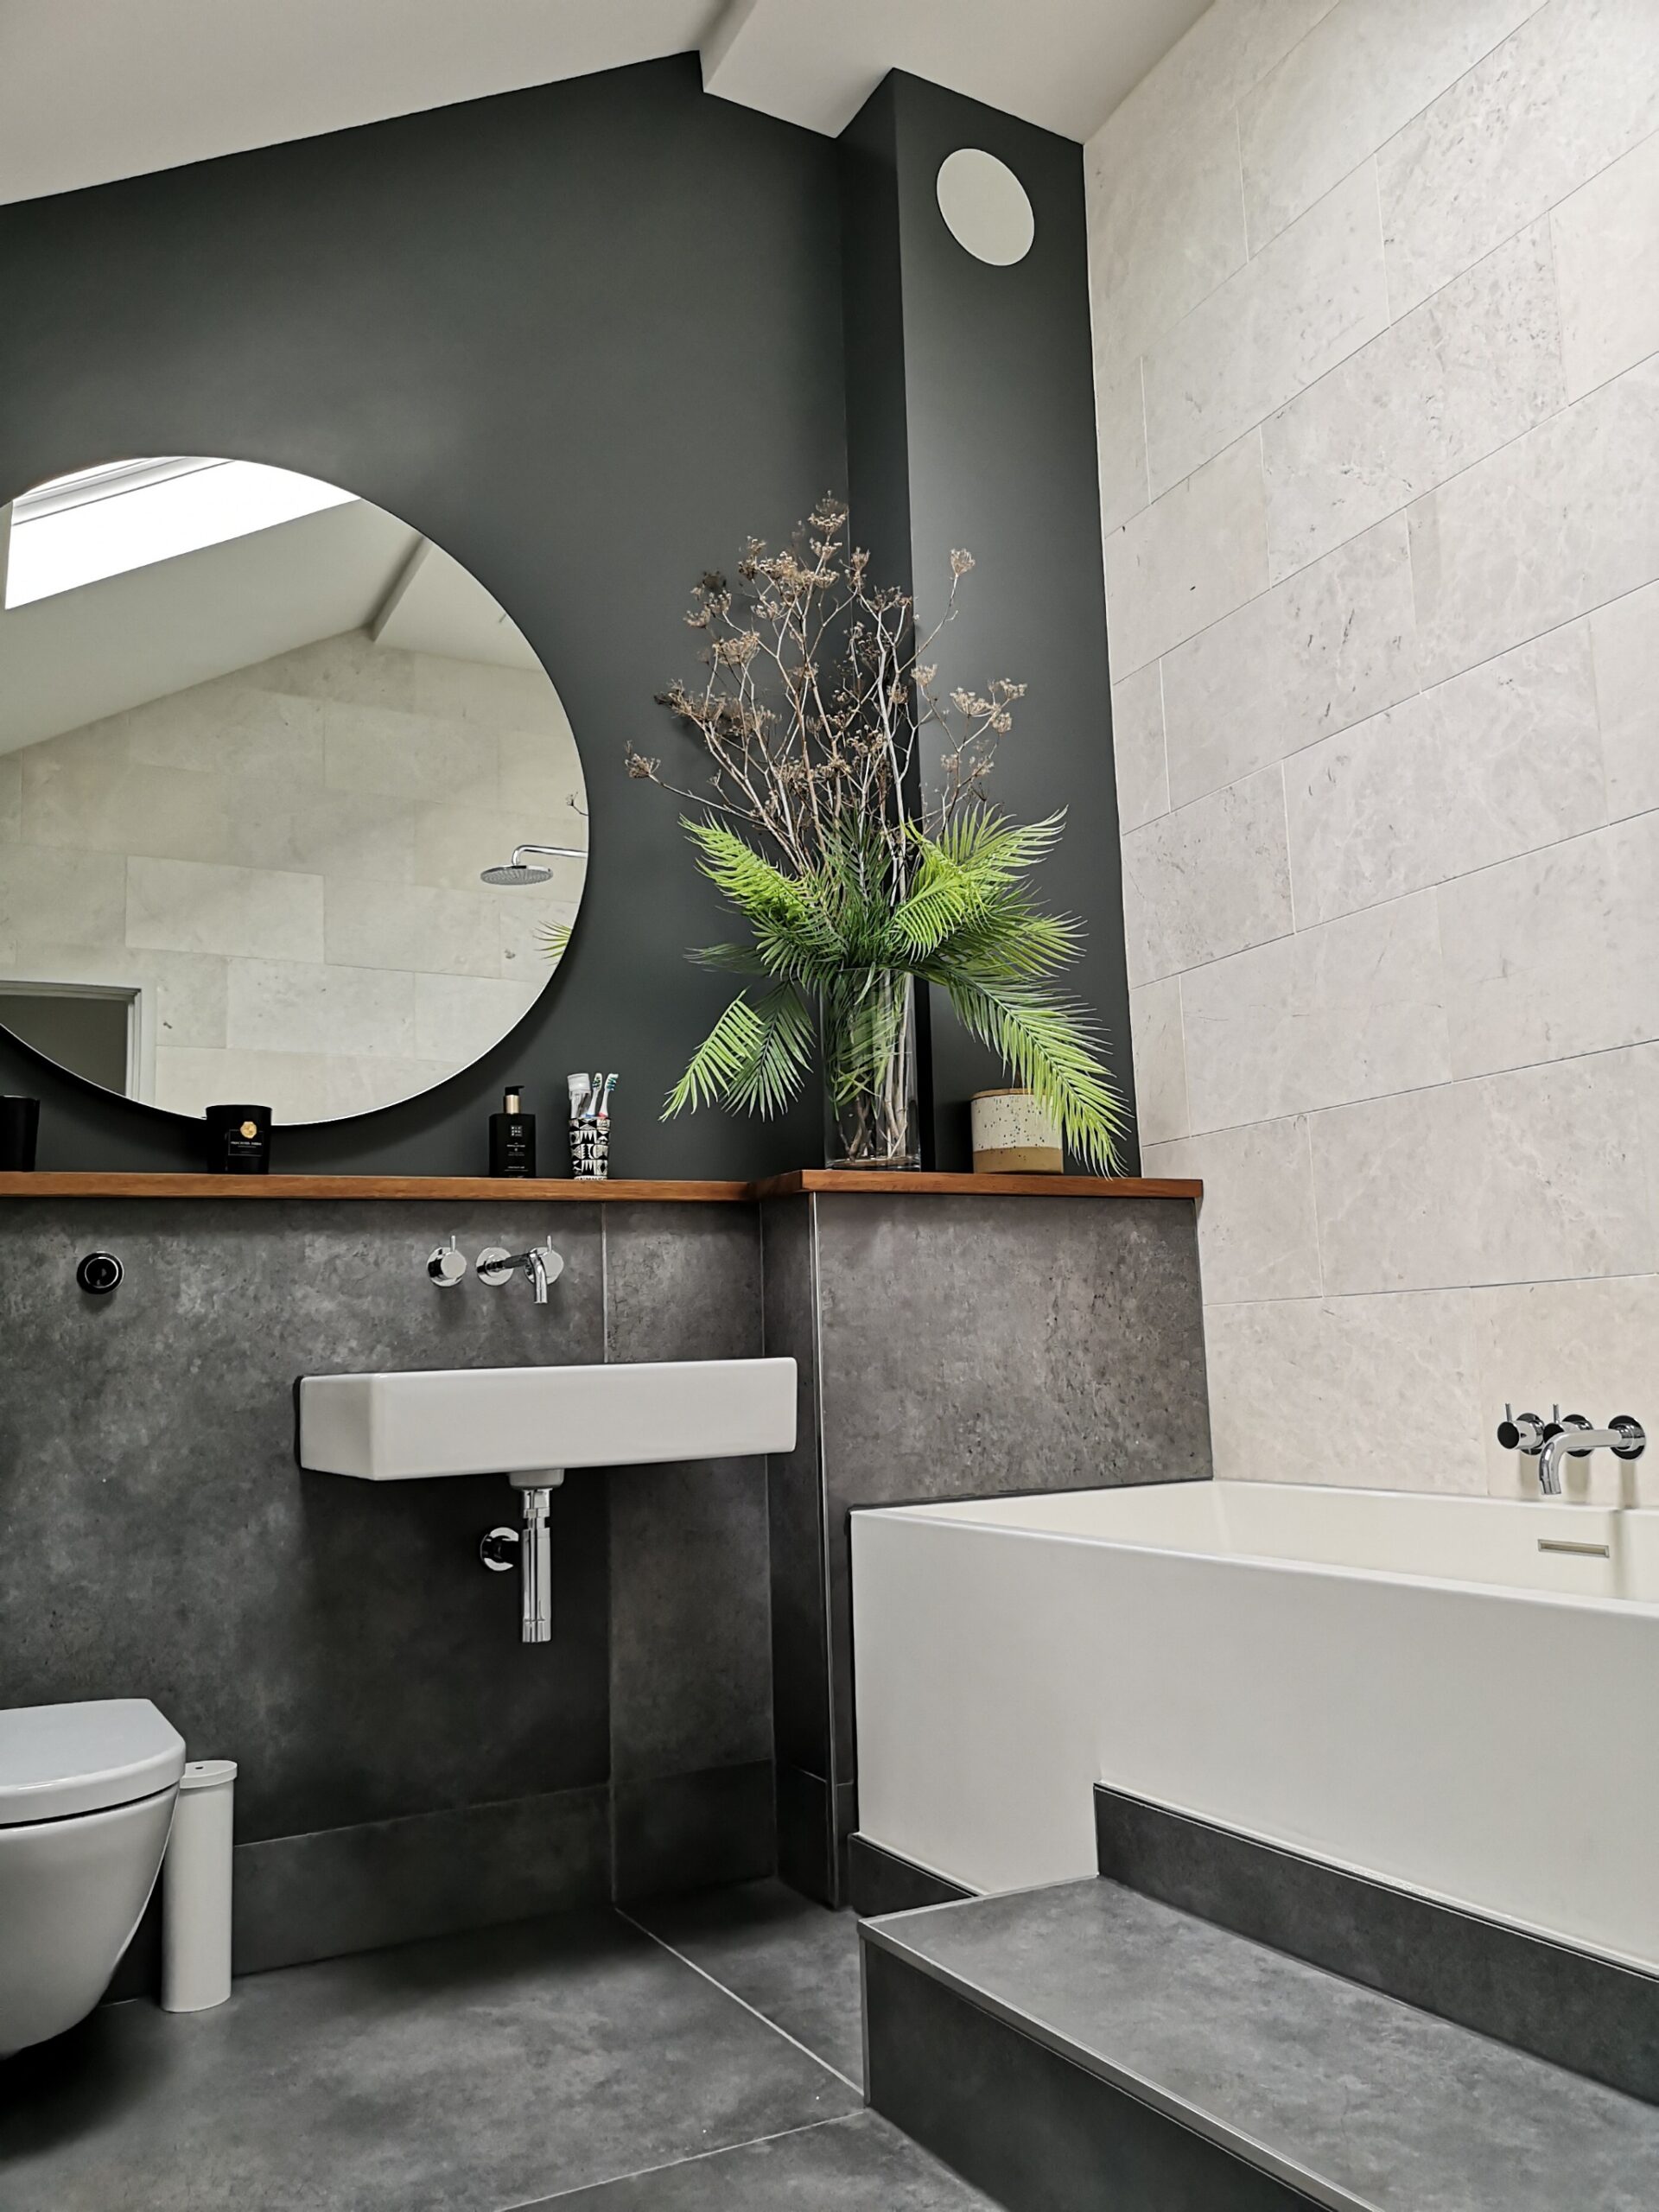 Bathroom with rounded mirror